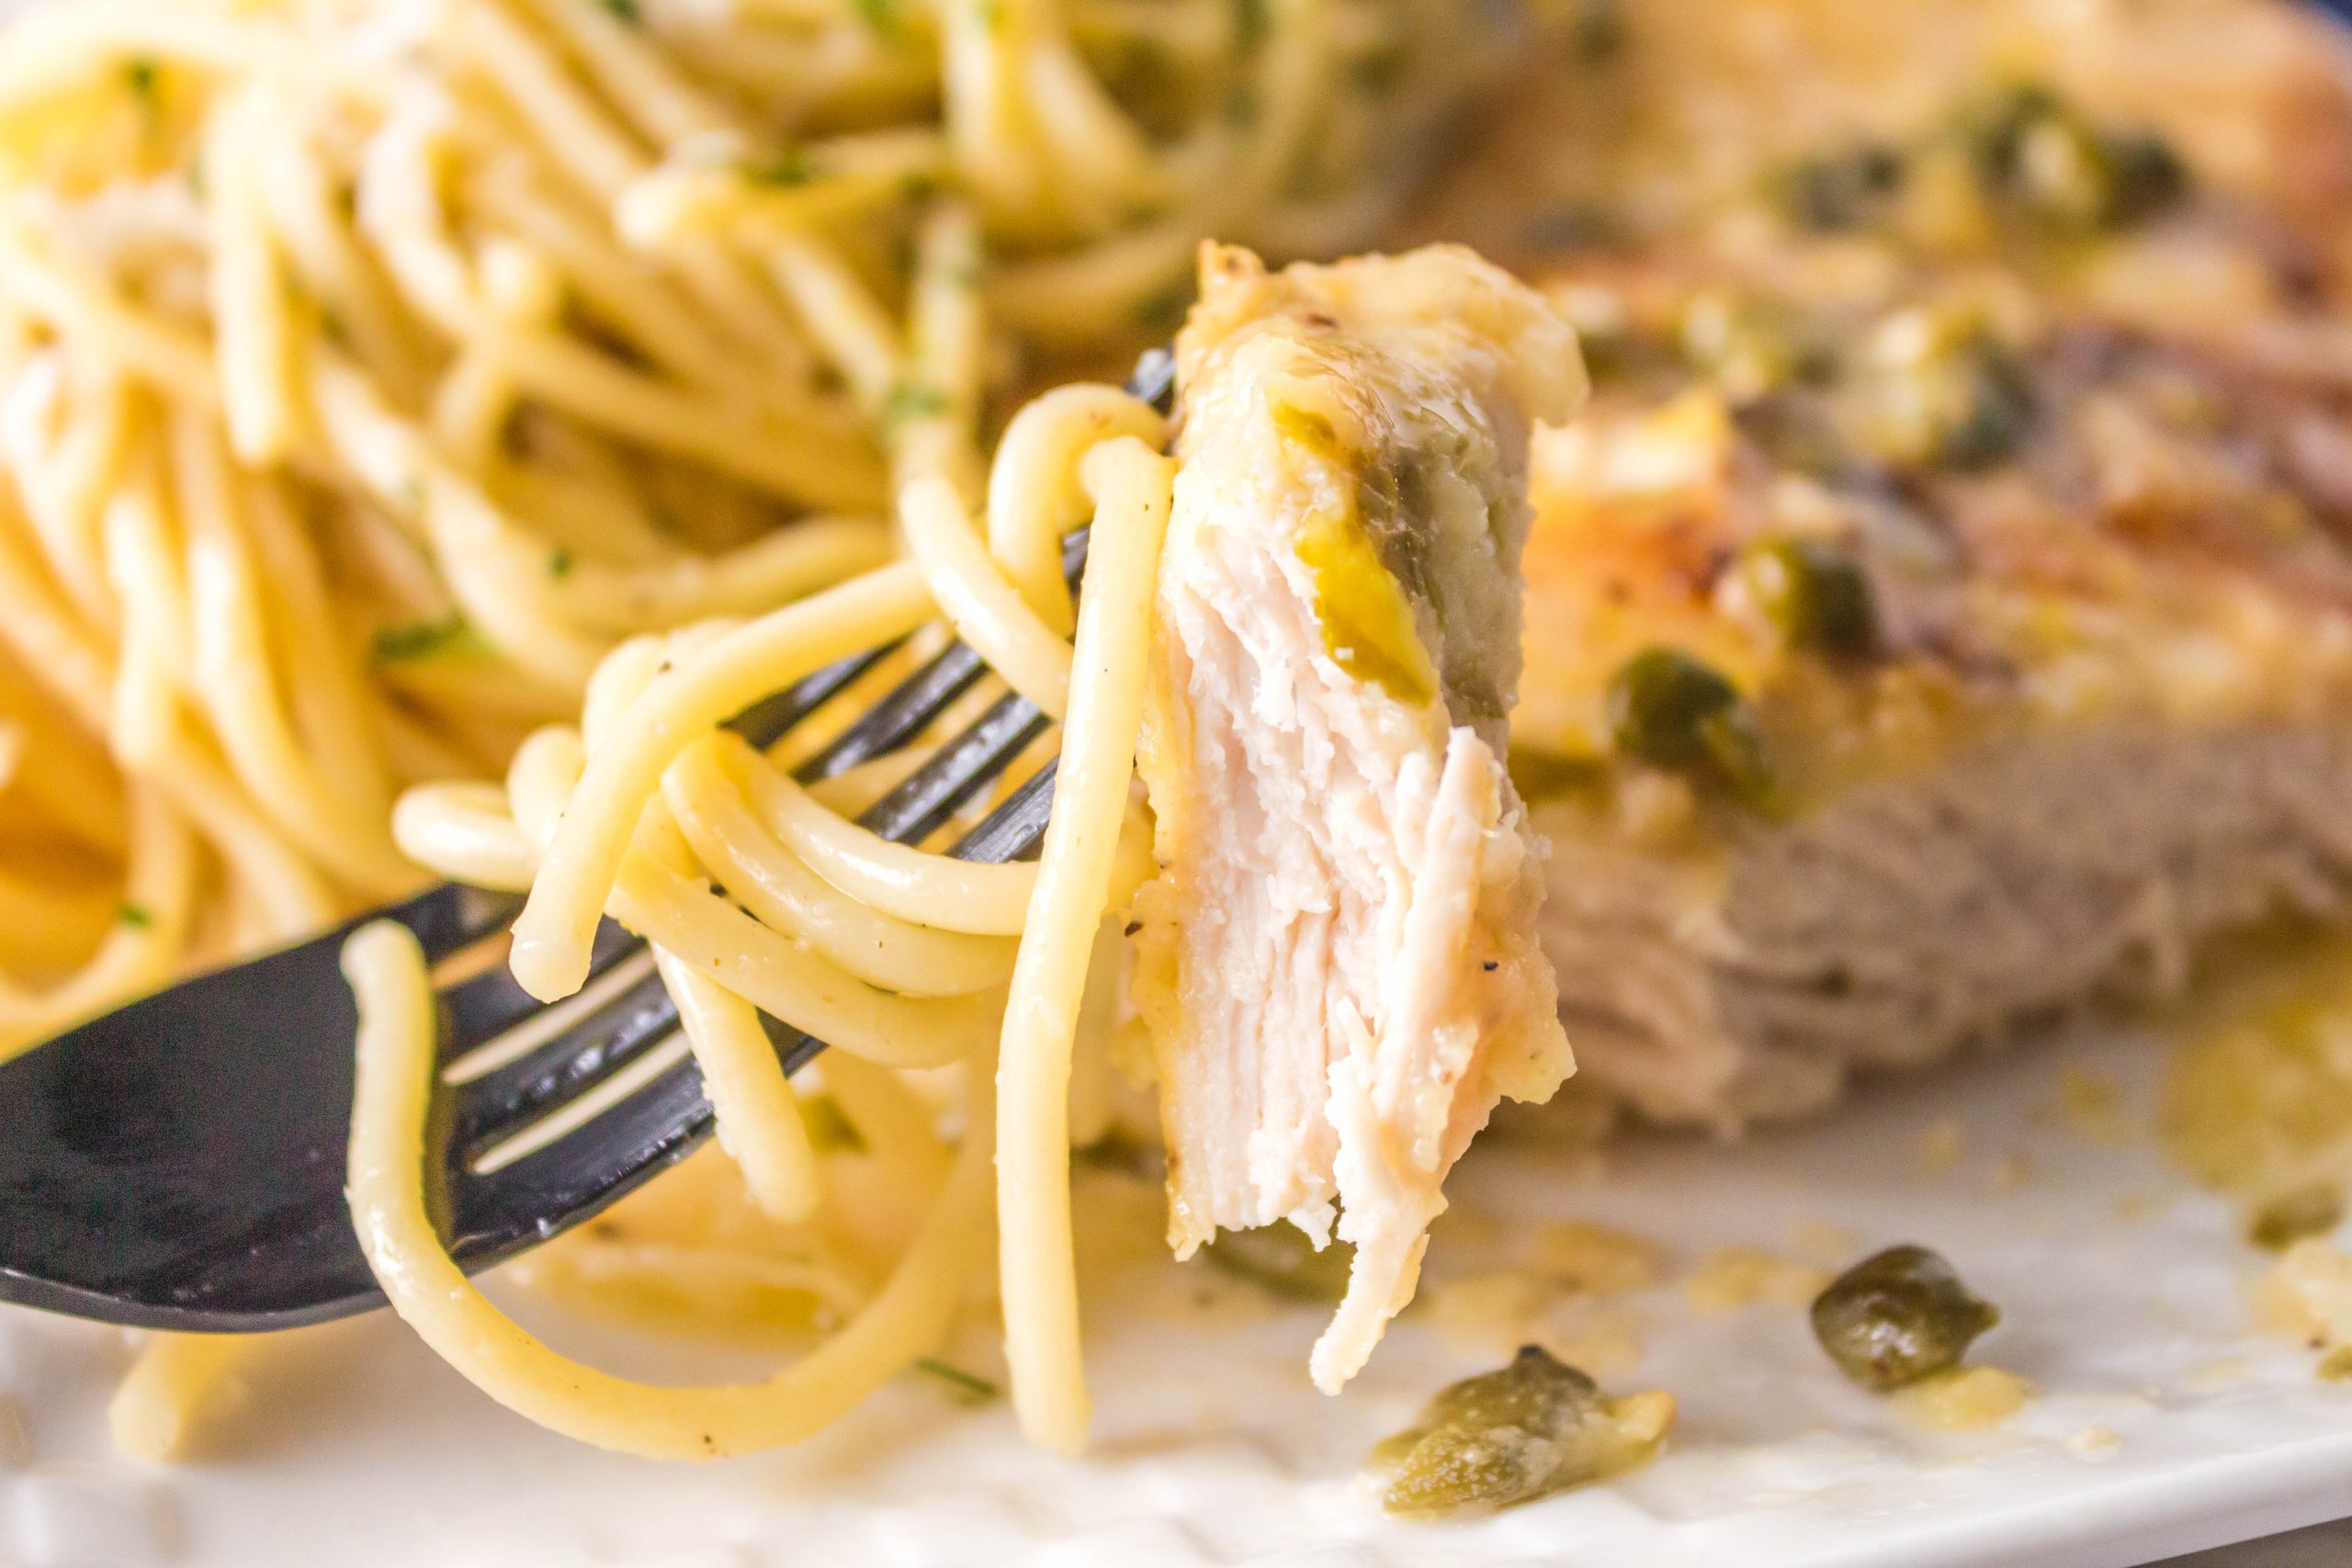 Bite of Chicken breast and pasta on a fork.